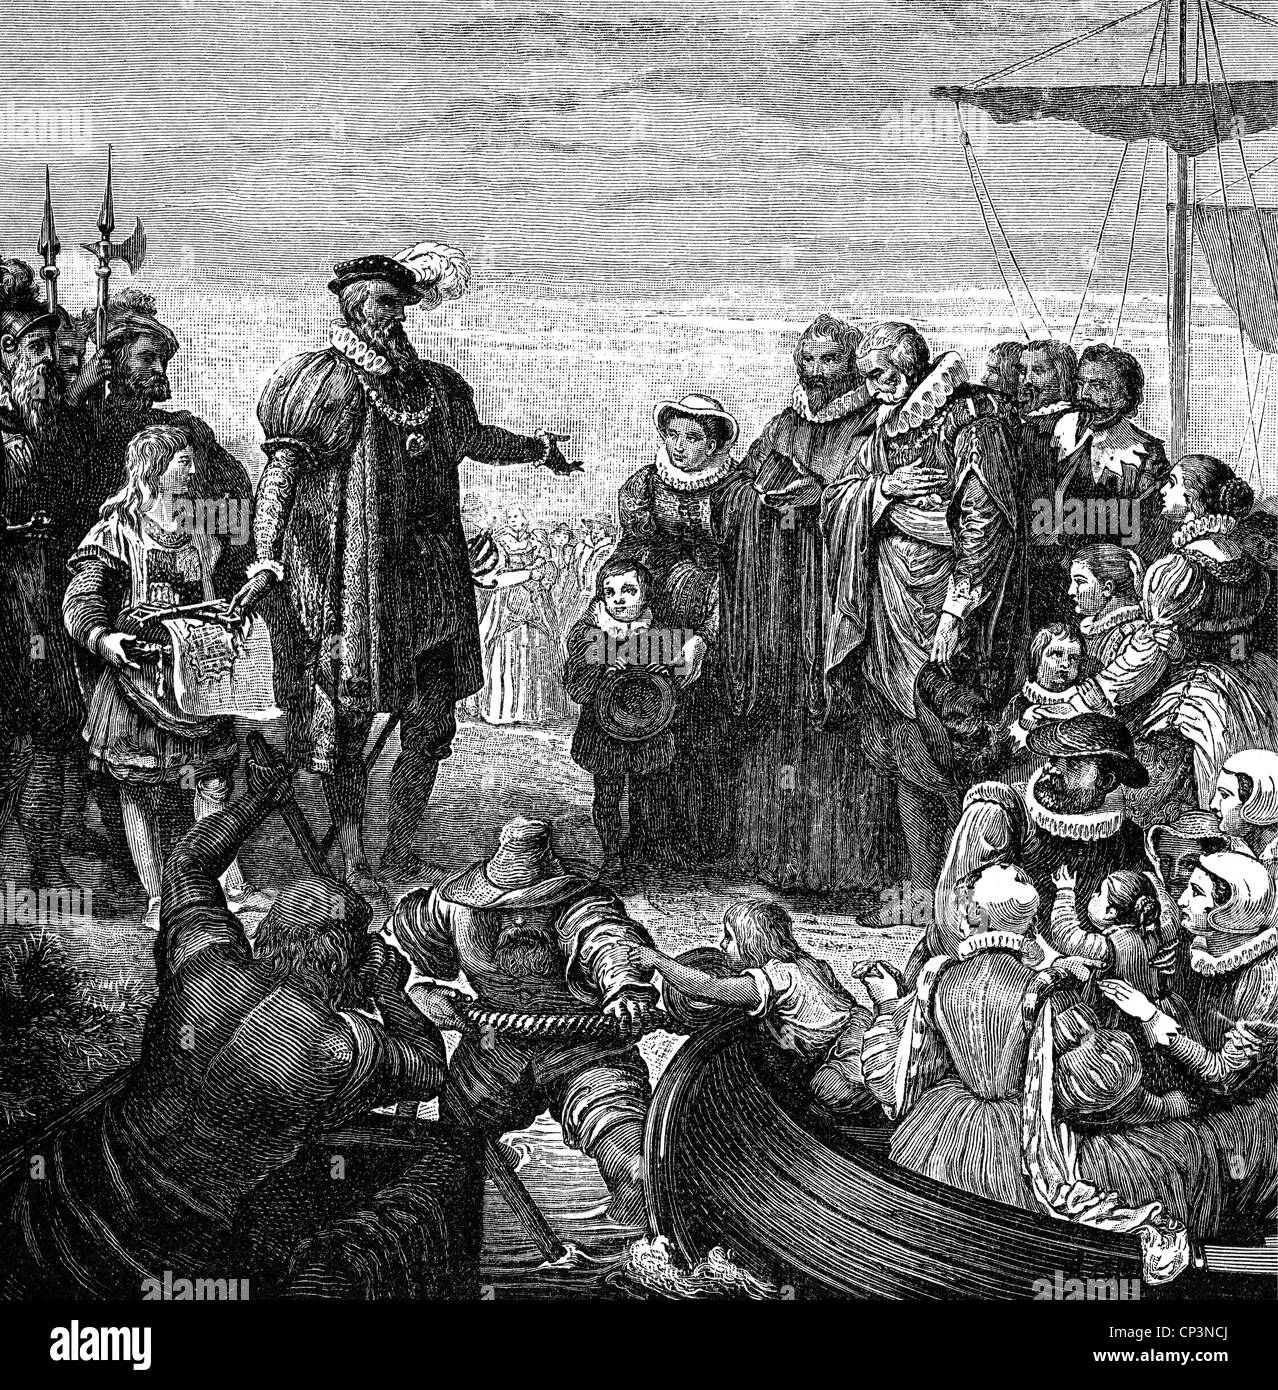 Frederick III 'the Pious', 14.2.1515 - 26.10.1576, Elector Palatinate 12.2.1559 - 26.10.1576, giving exile to Dutch calvinists, 1562, wood engraving, 19th century, Stock Photo